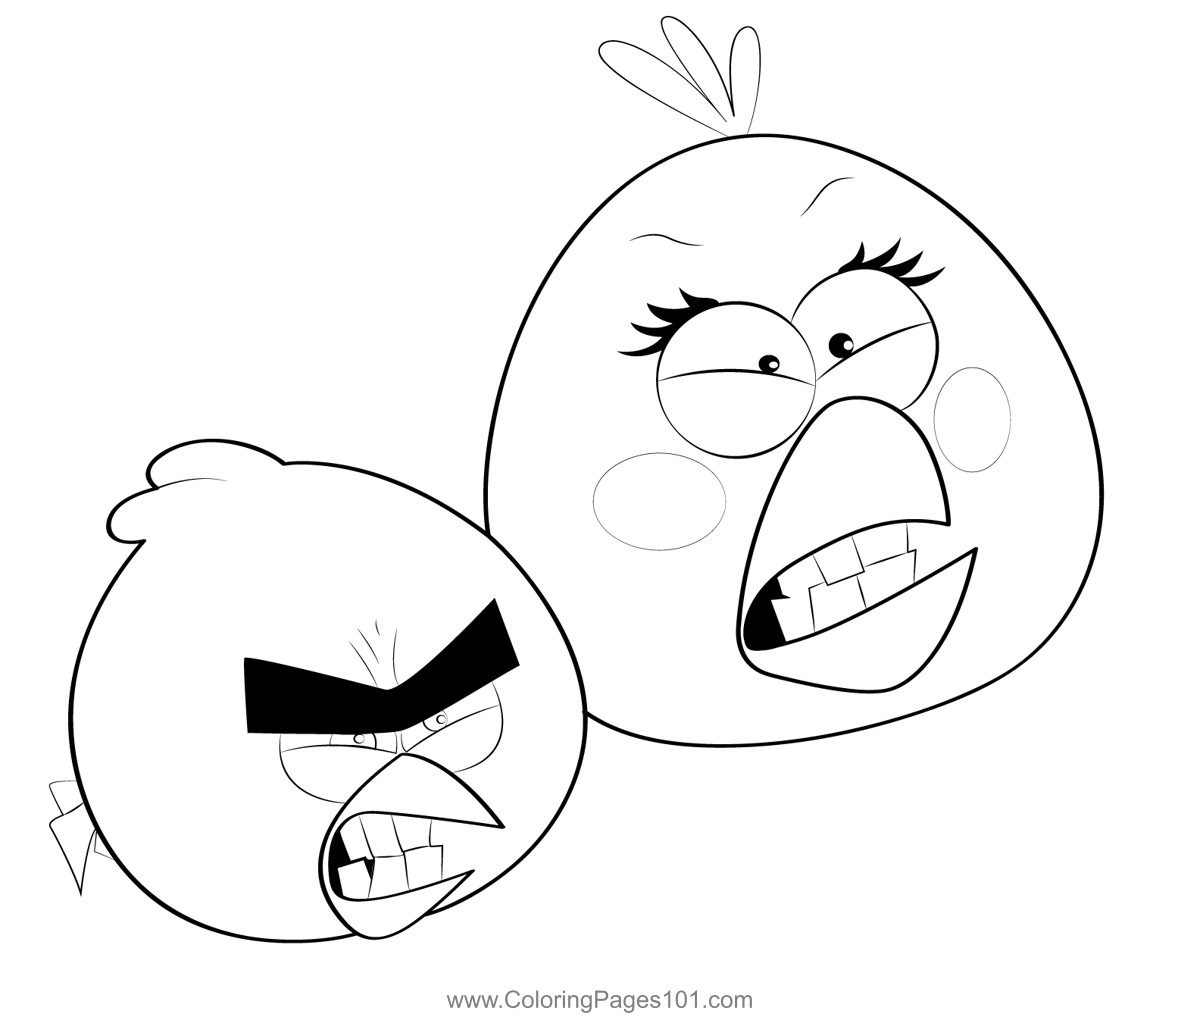 Two Angry Birds